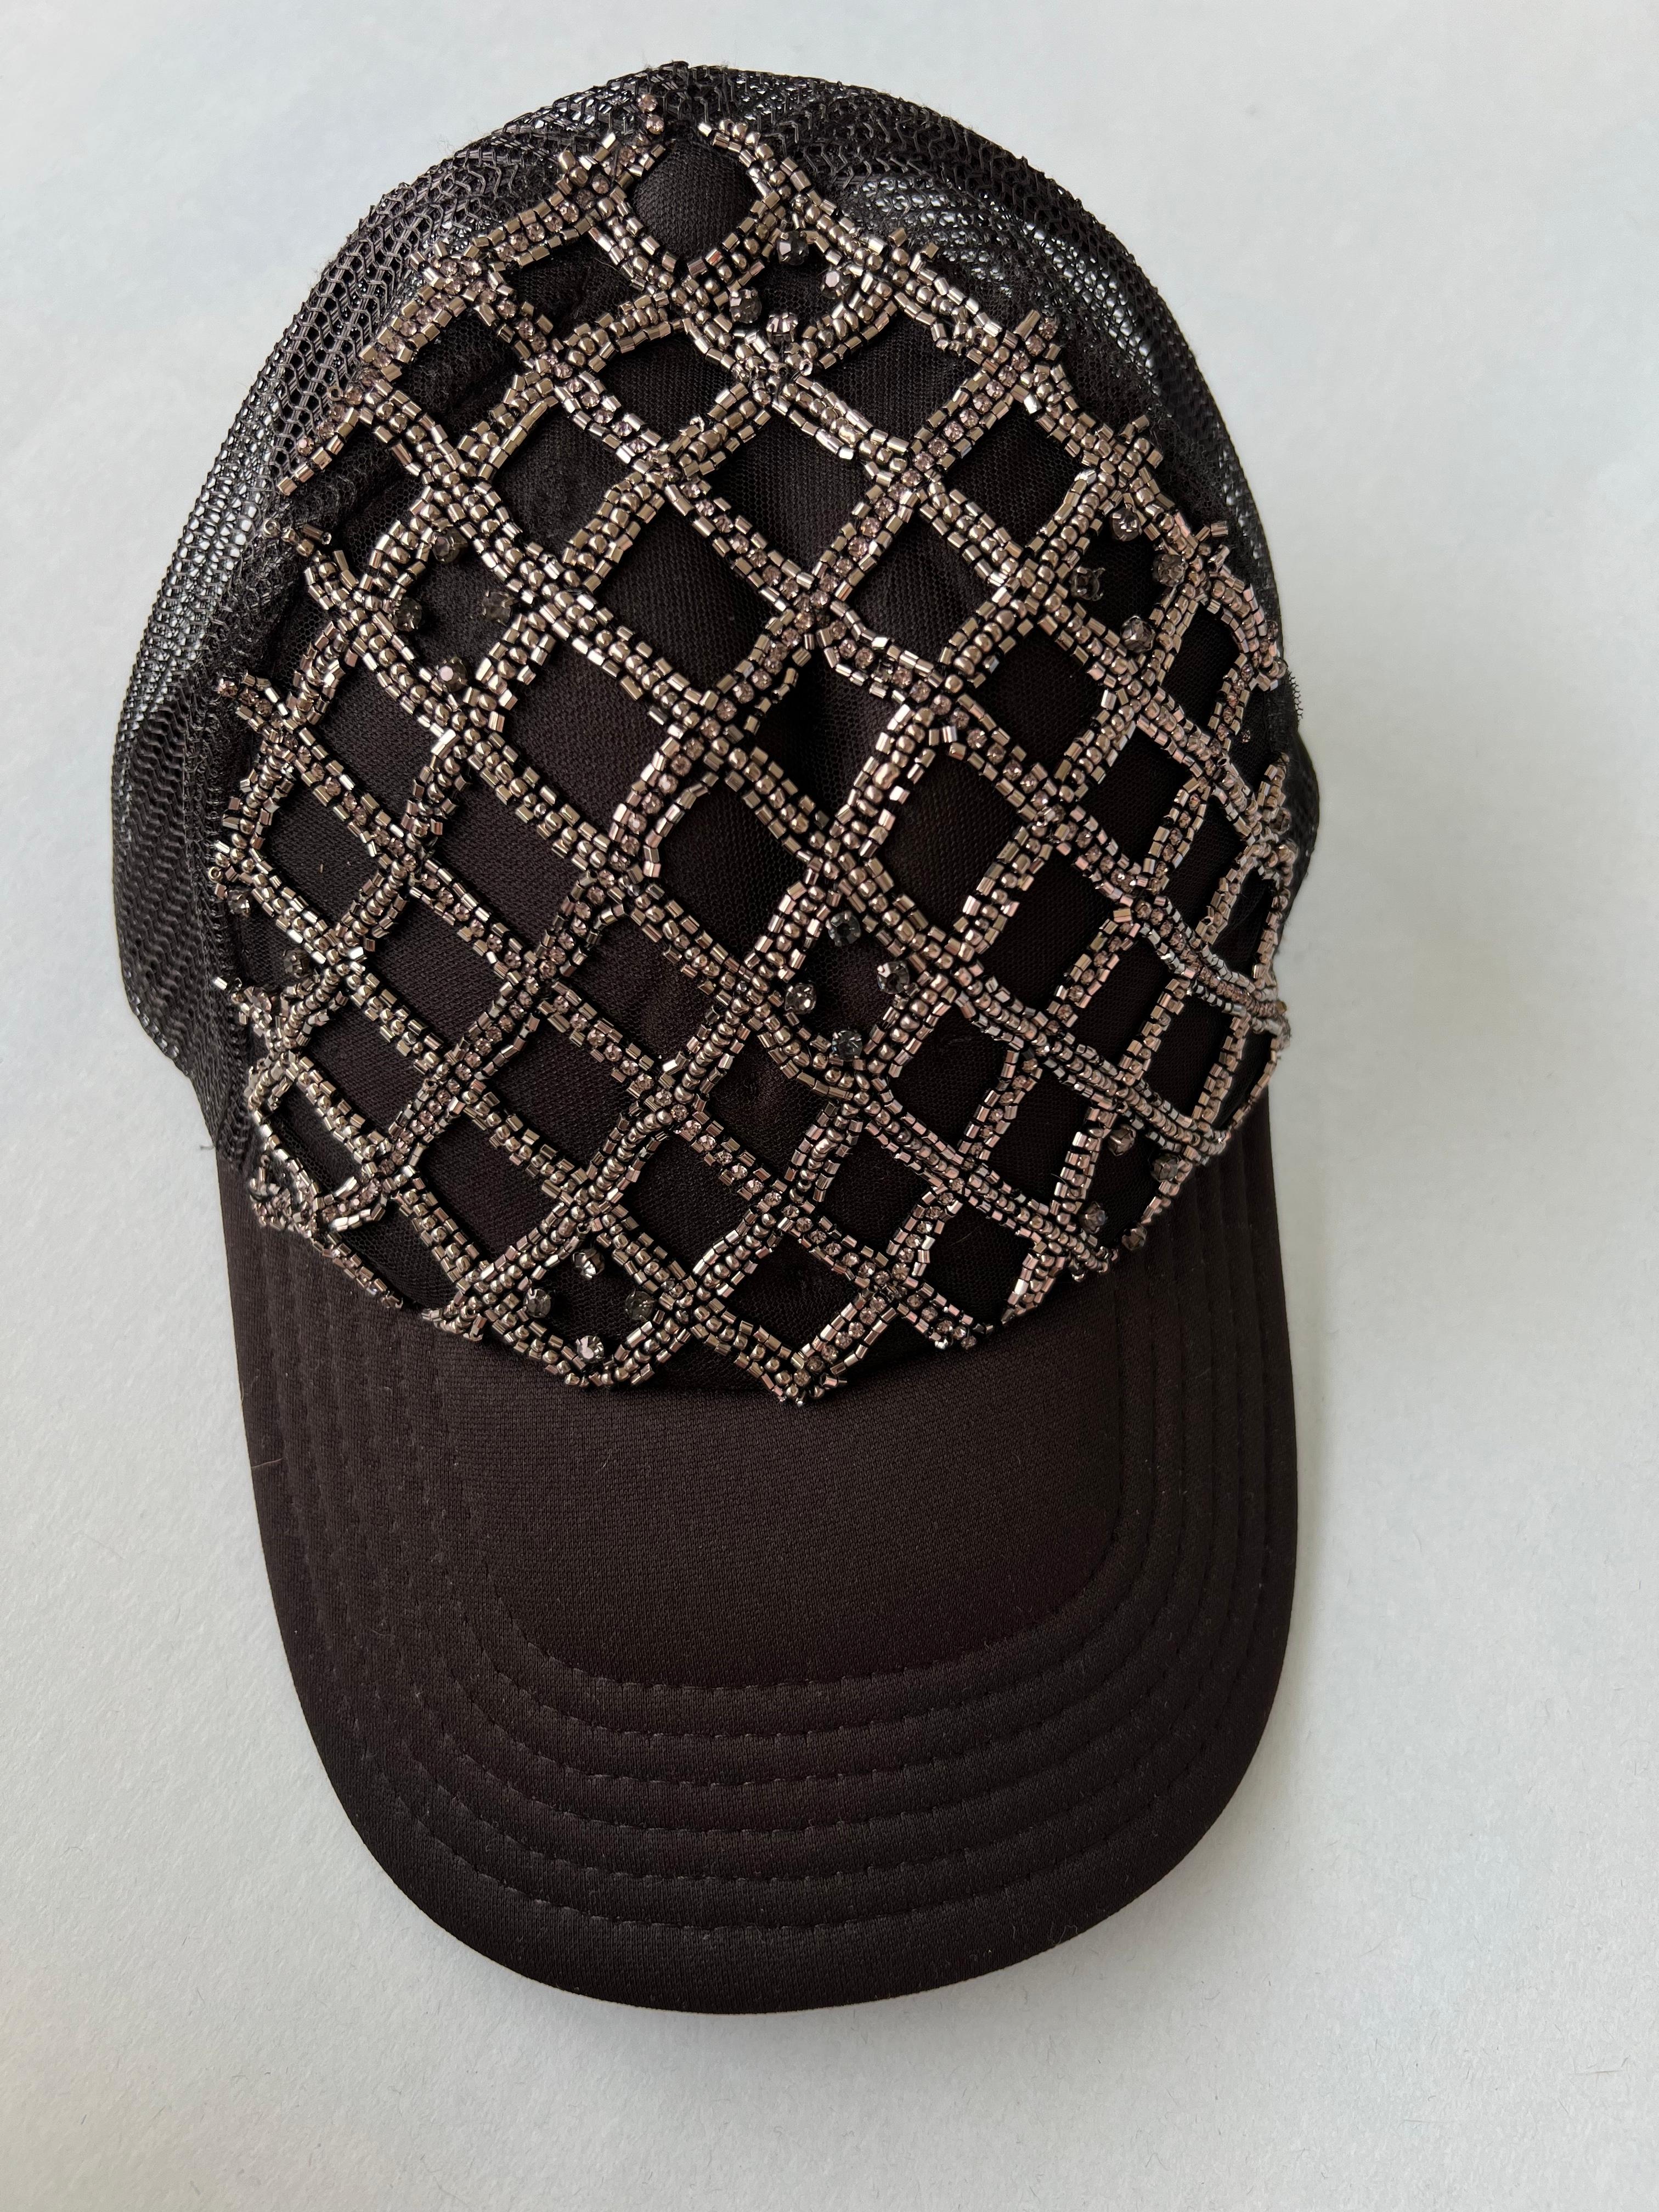 Brand: J Dauphin
Crystal Embellishment Hat Black Trucker J Dauphin

Embroidery Made in LA

Express a hybrid of easy-luxe and bourgeoisie jet-set look. Effortless and versatile, elegant and classy they bring an allure of unexpected outside-the-box